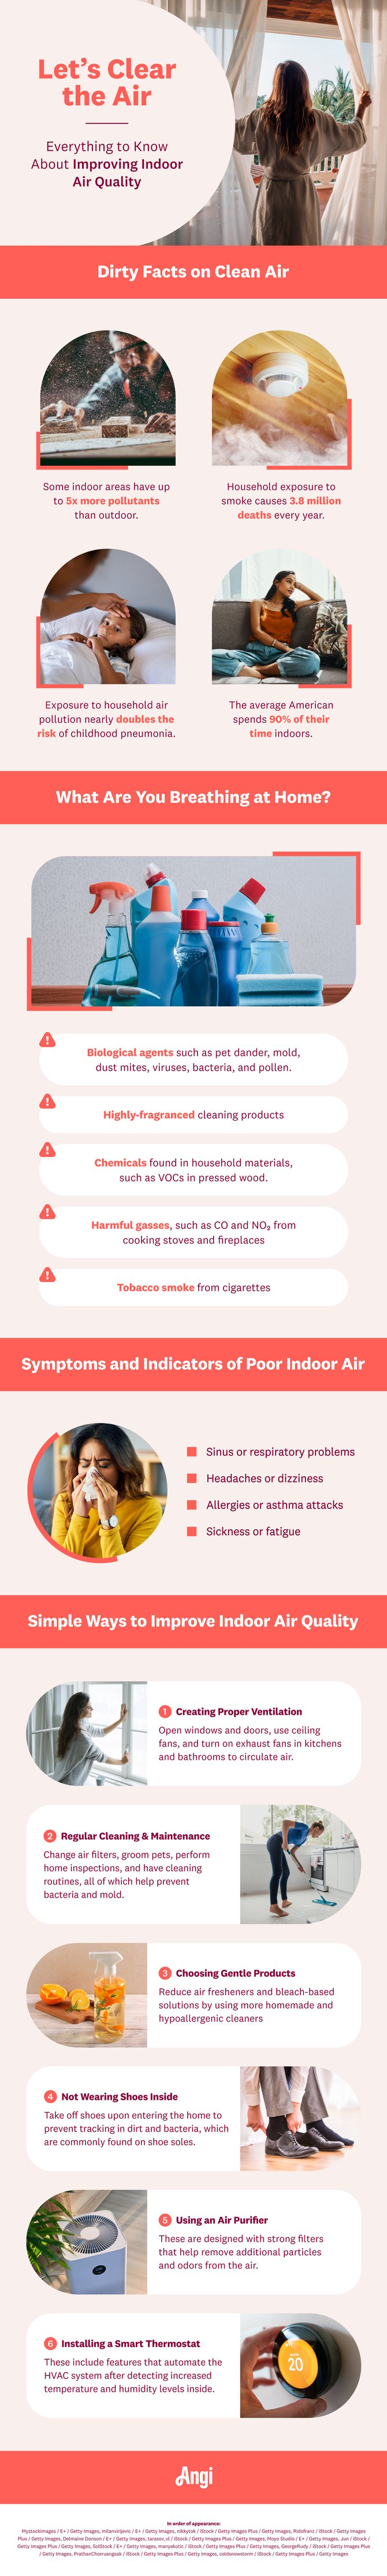 Infographic explaining how indoor air can be polluted as well as several methods for minimizing indoor air pollution. 